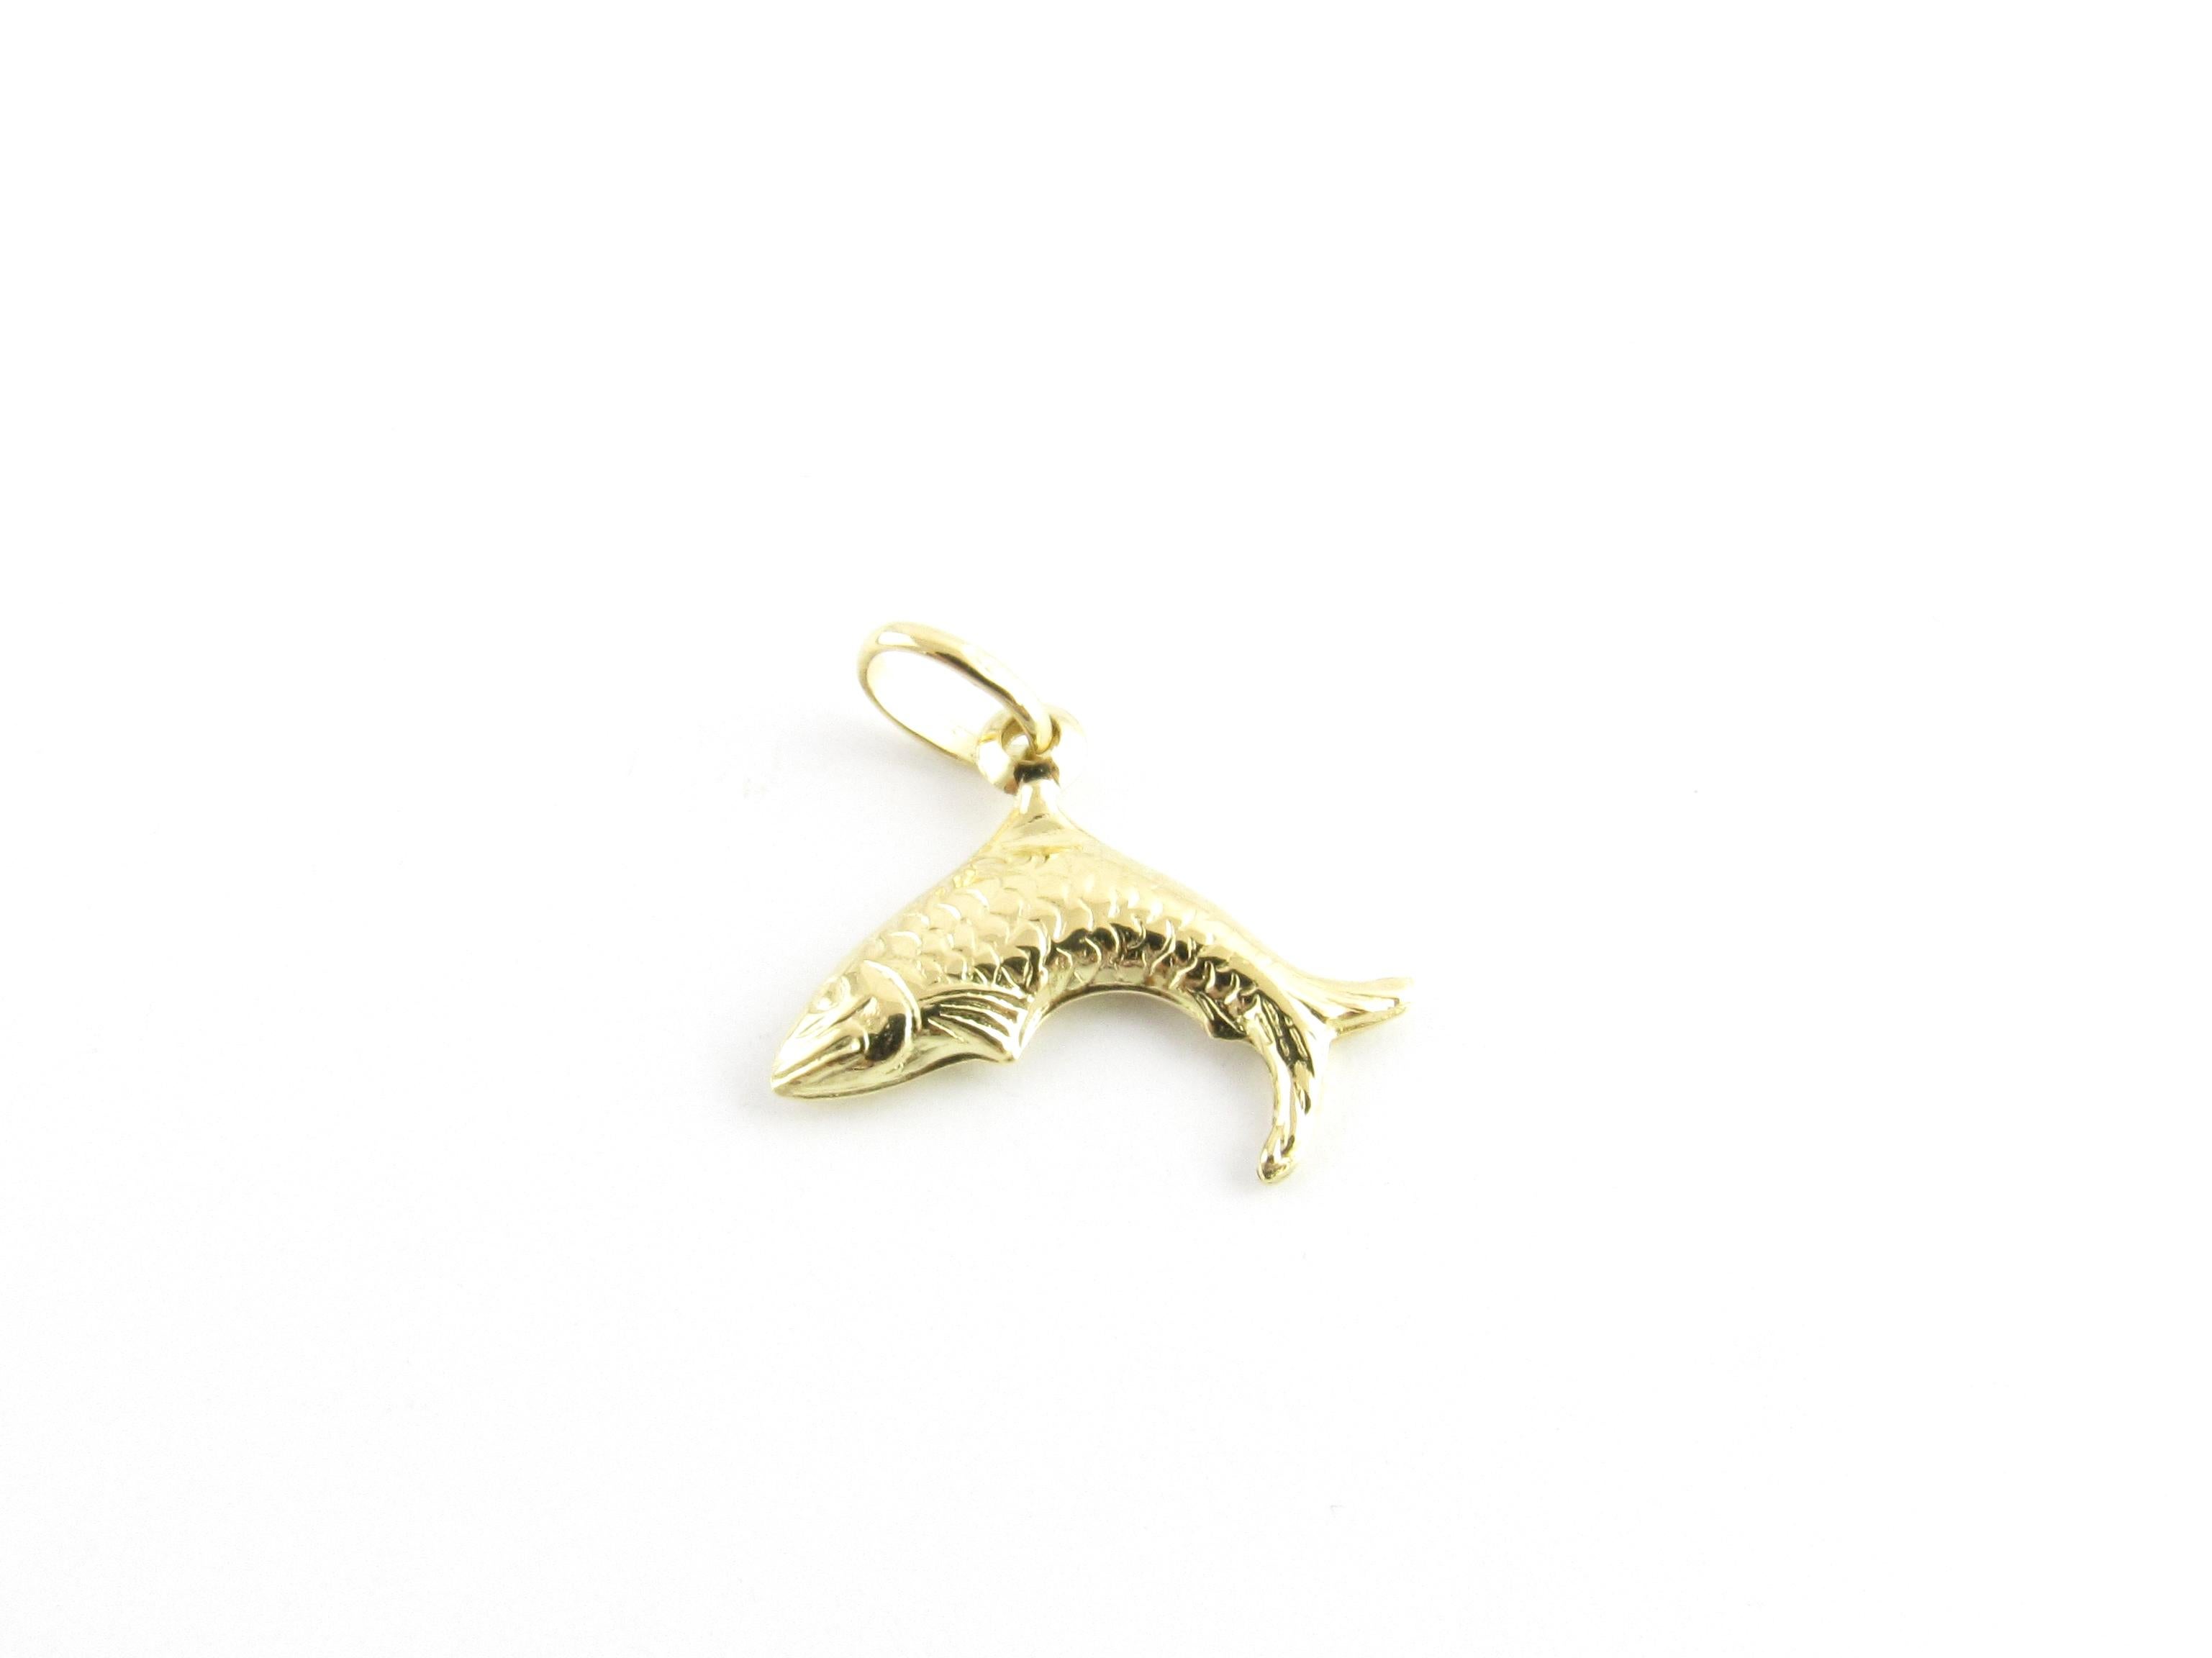 Vintage 18 Karat Yellow Gold Trout Charm

Perfect gift for the fishing enthusiast!

This lovely charm features a beautifully detailed trout crafted in classic 18K yellow gold.

Size: 15 mm x 18 mm (actual charm)

Weight: 0.8 dwt. / 1.3 gr.

Stamped: